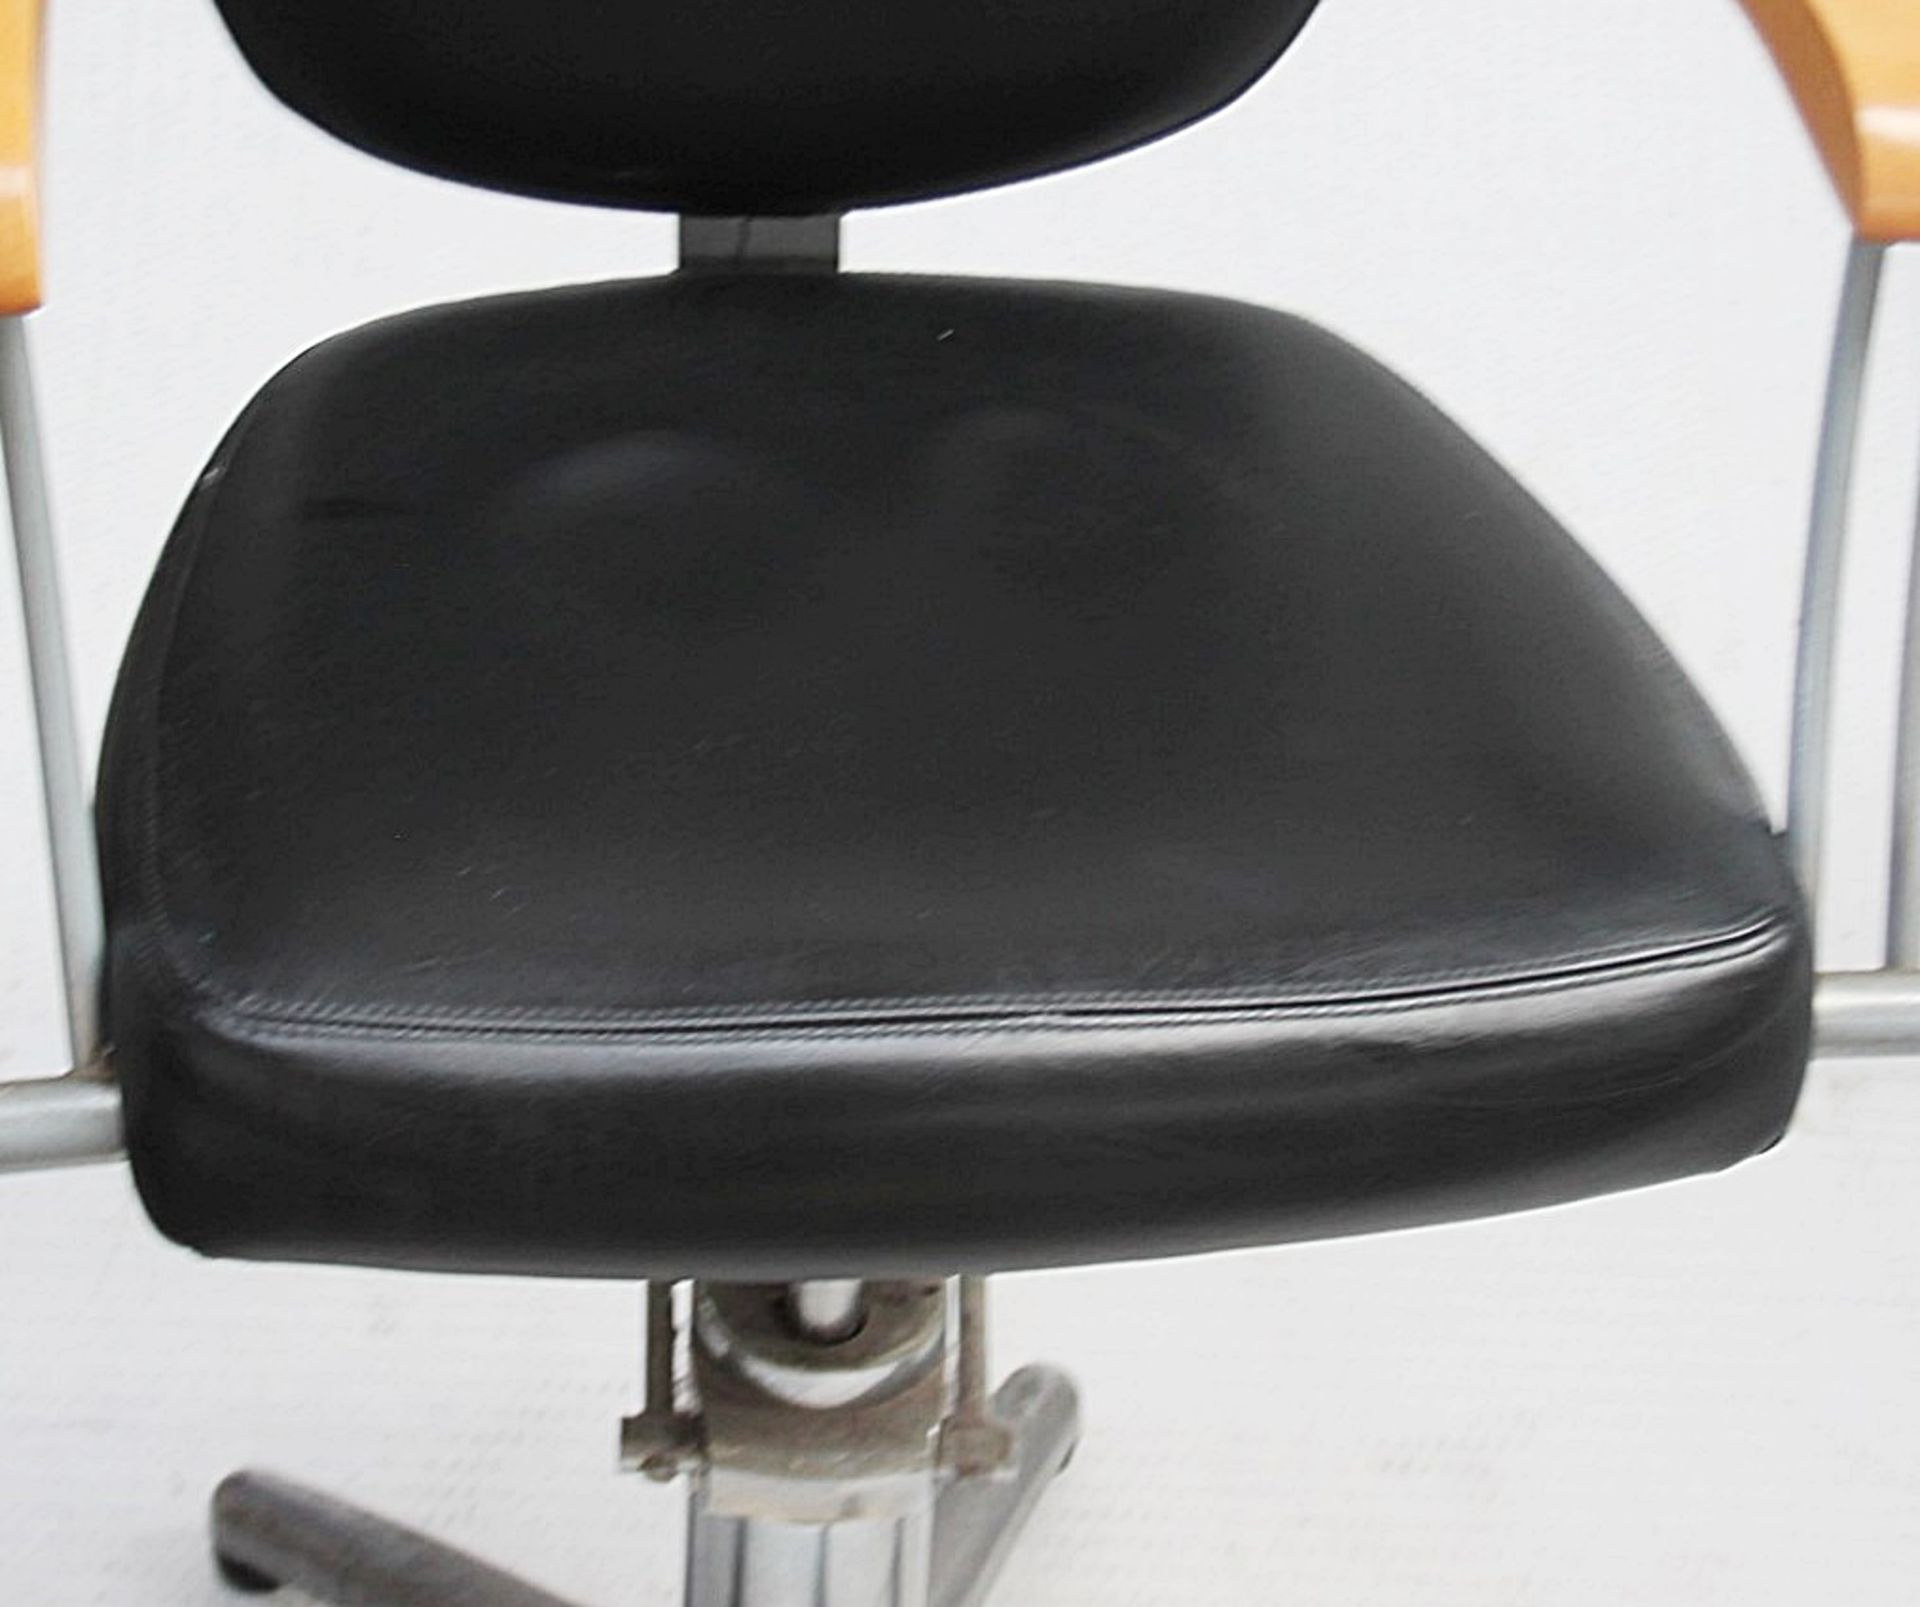 1 x Adjustable Black Hydraulic Barber Hairdressing Chair - Recently Removed From A Boutique Hair - Image 9 of 10